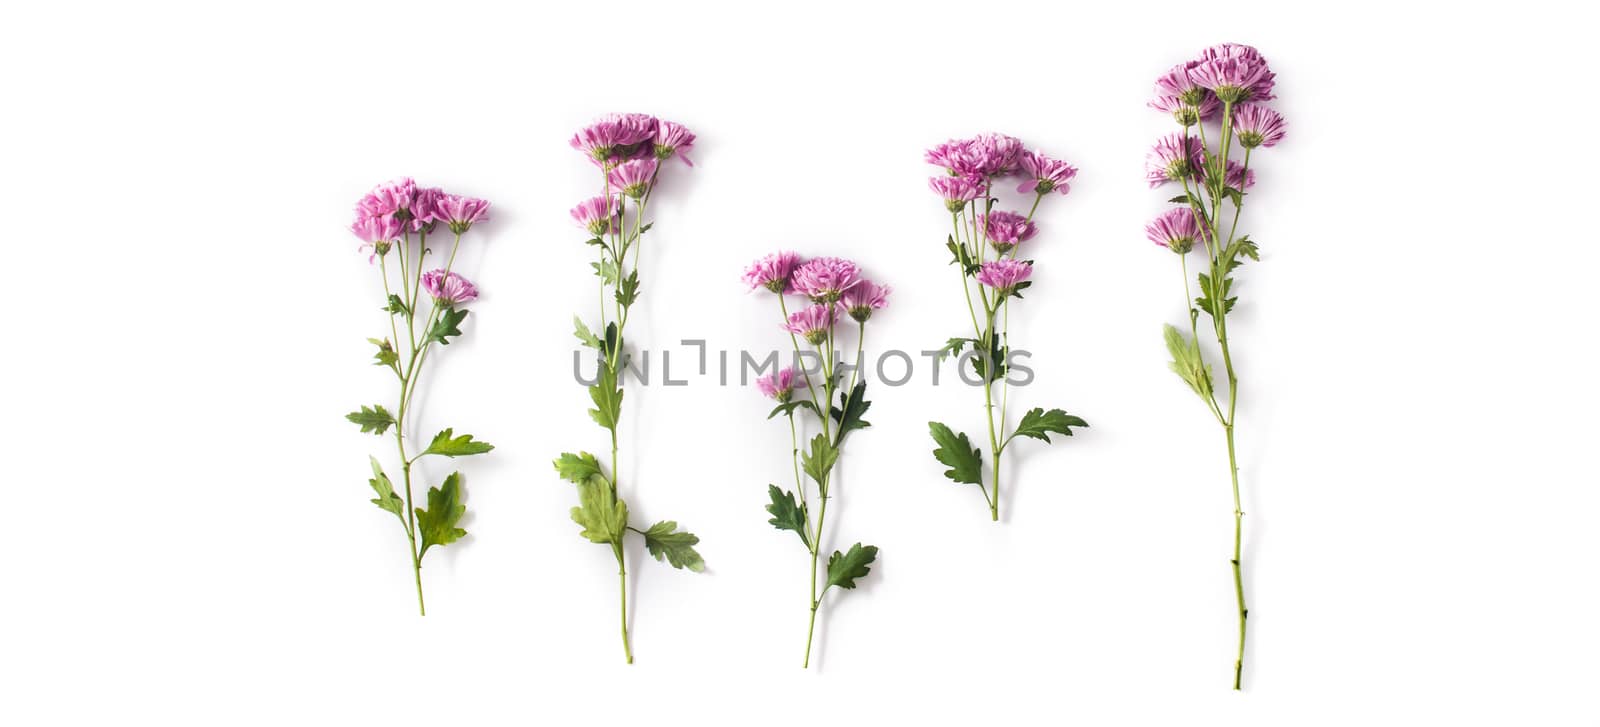 Violet chrysanthemum flowers bouquet isolated on white background